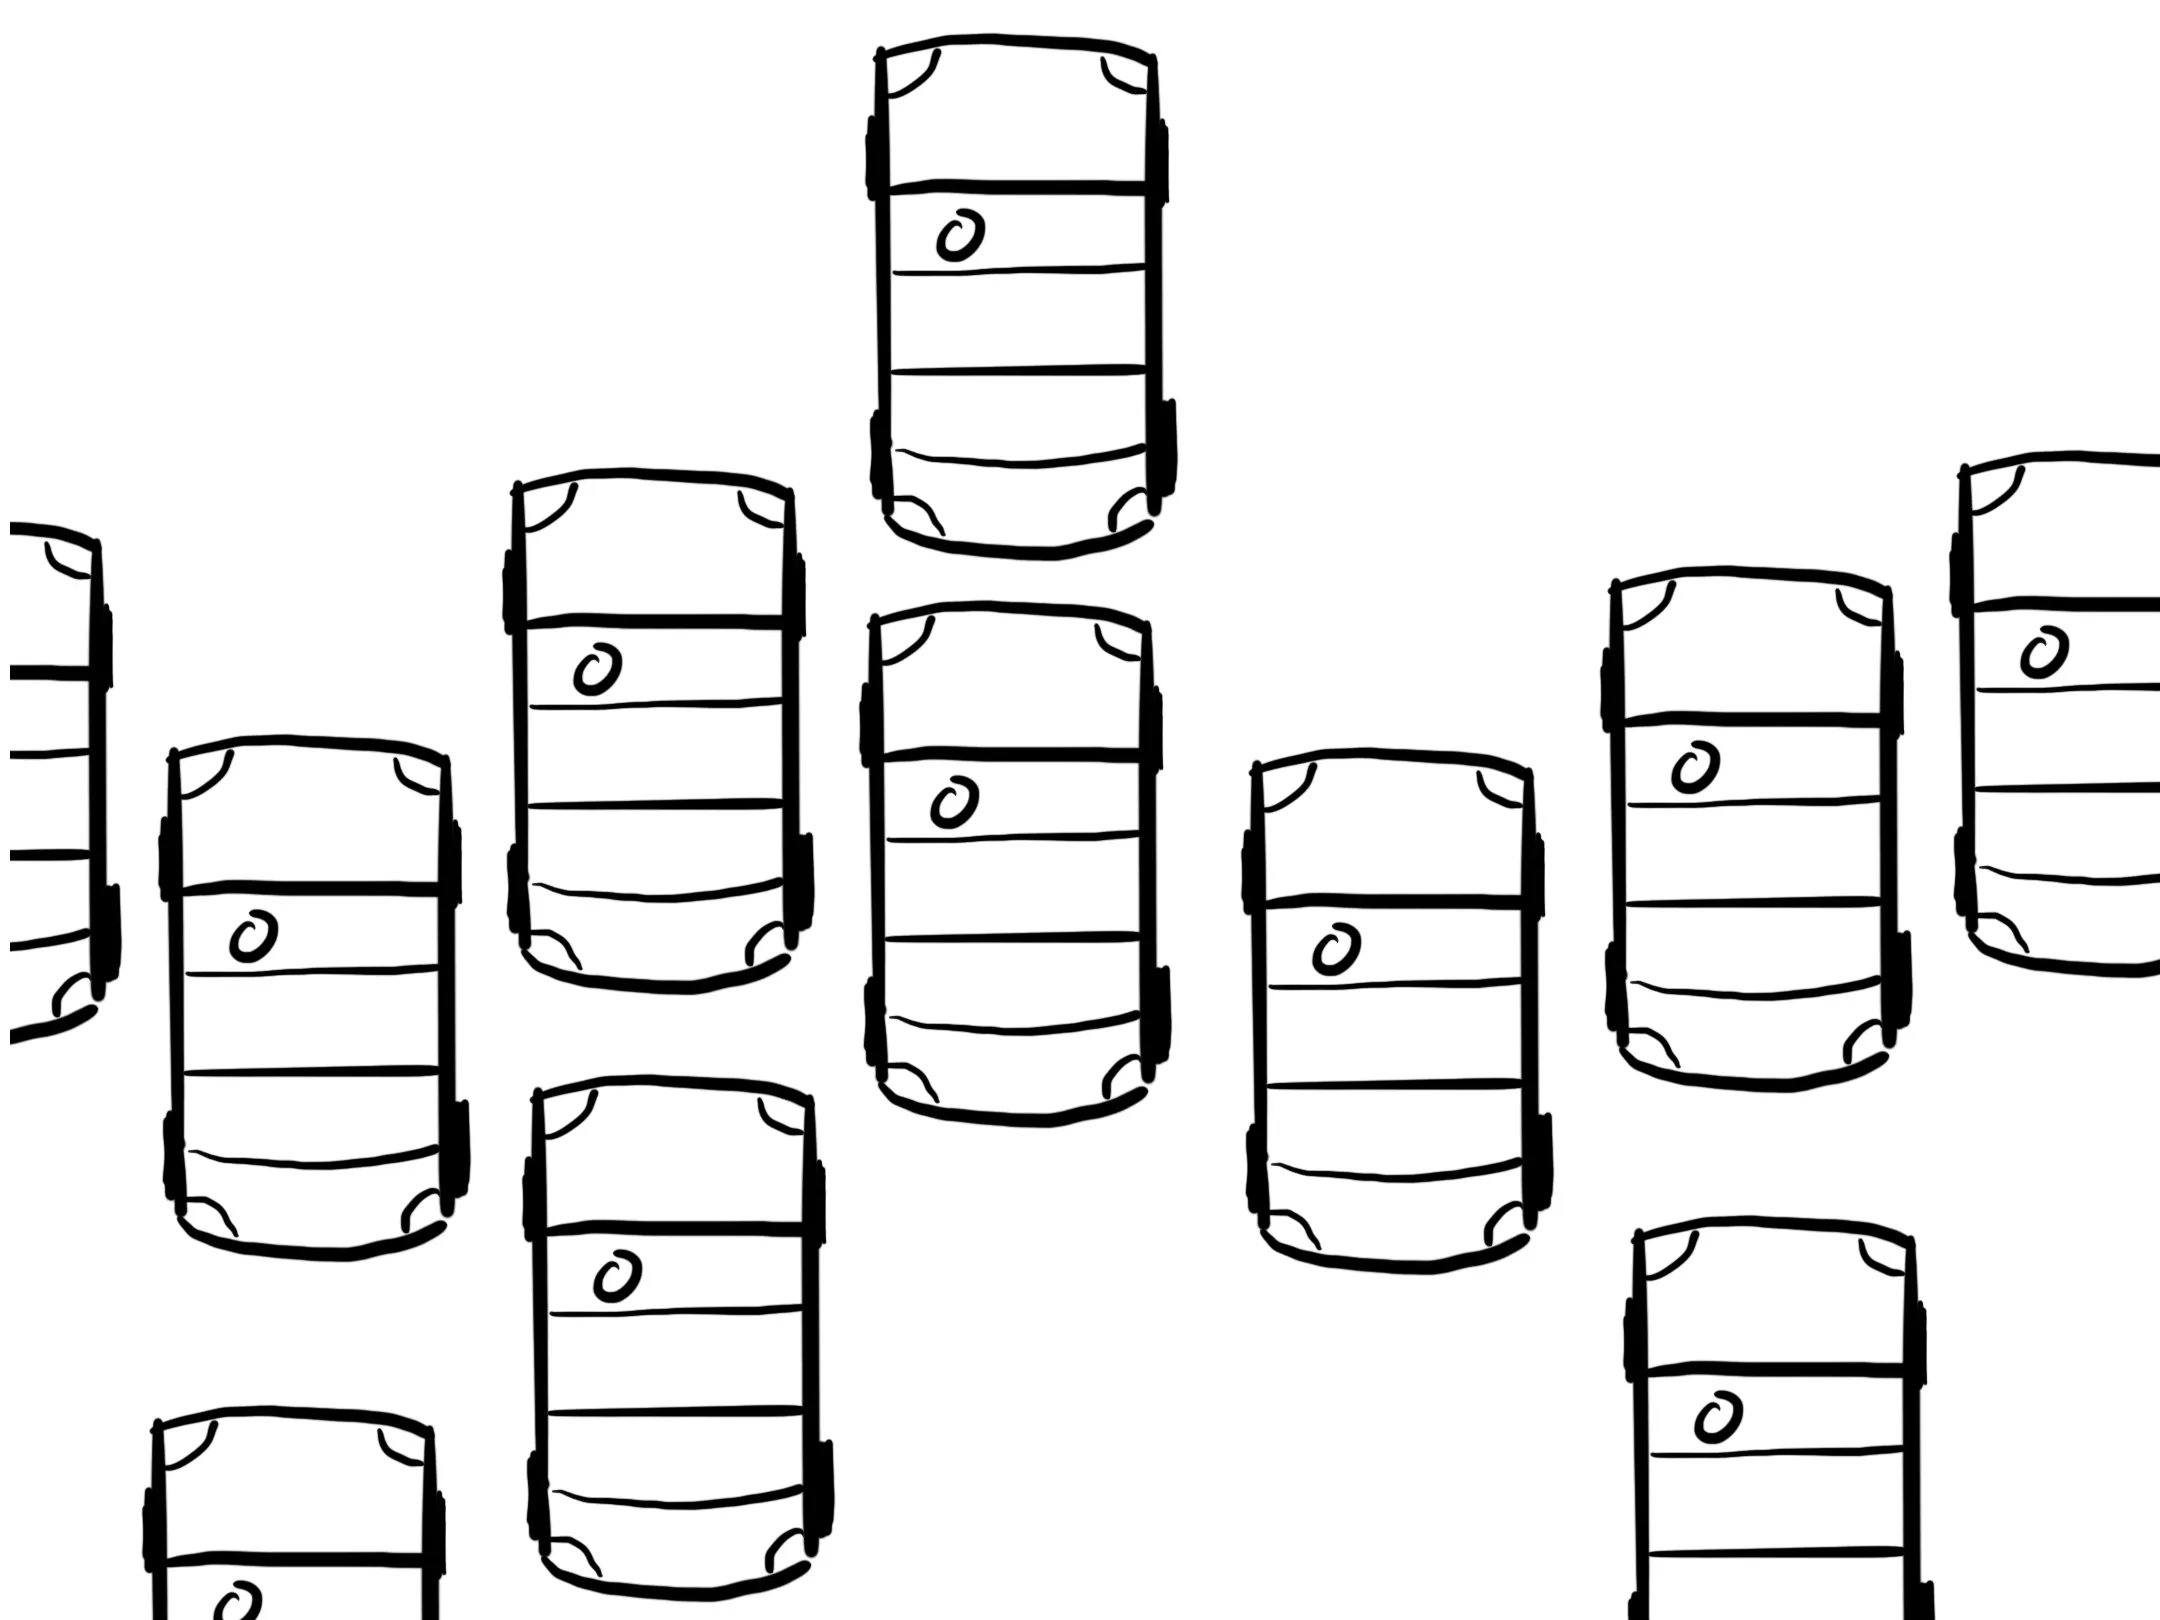 Cartoon of a car with many cars to its sides